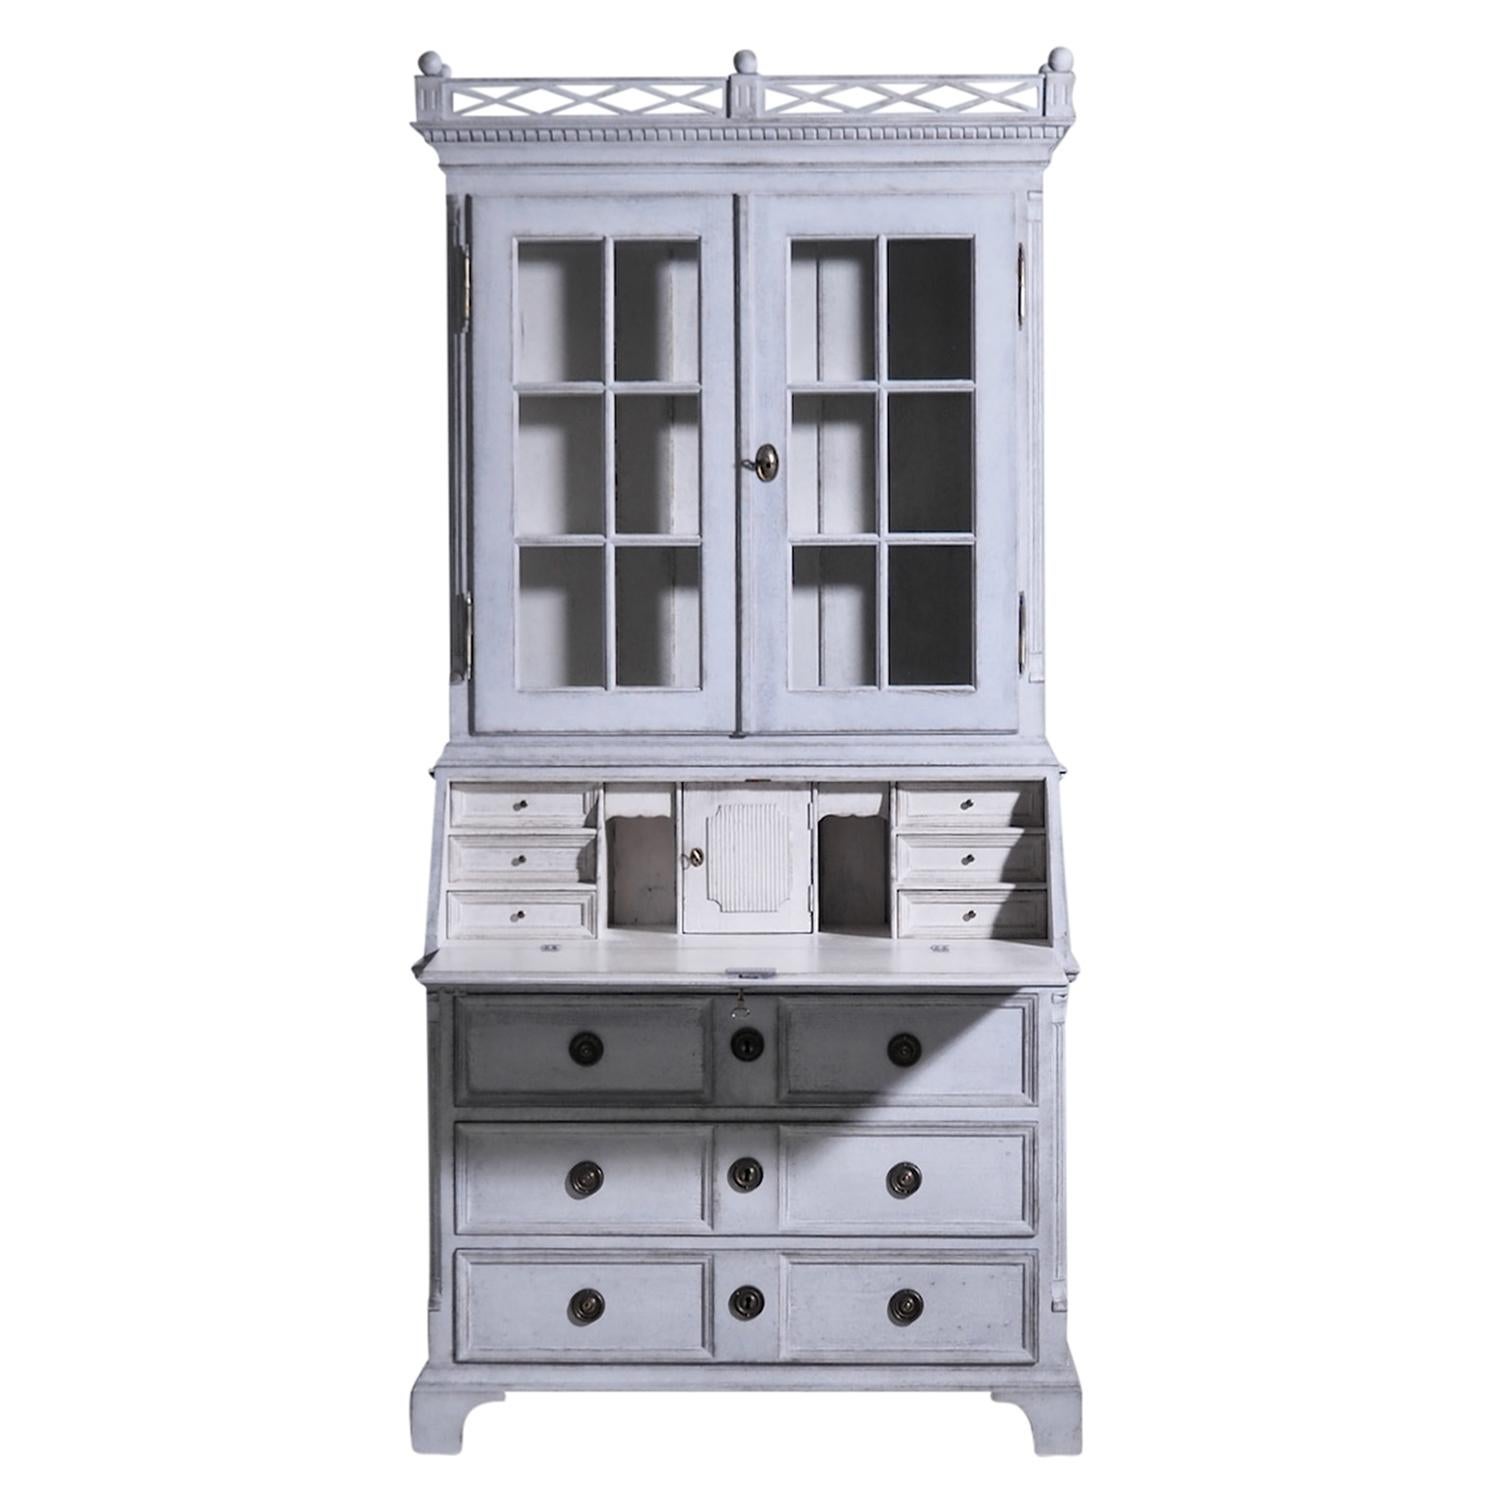 A light-grey, white antique Swedish Gustavian two part bureau with a writing flap made of hand crafted painted Pinewood, in good condition. The Scandinavian secretaire is composed with two upper doors, three large drawers and many small storage